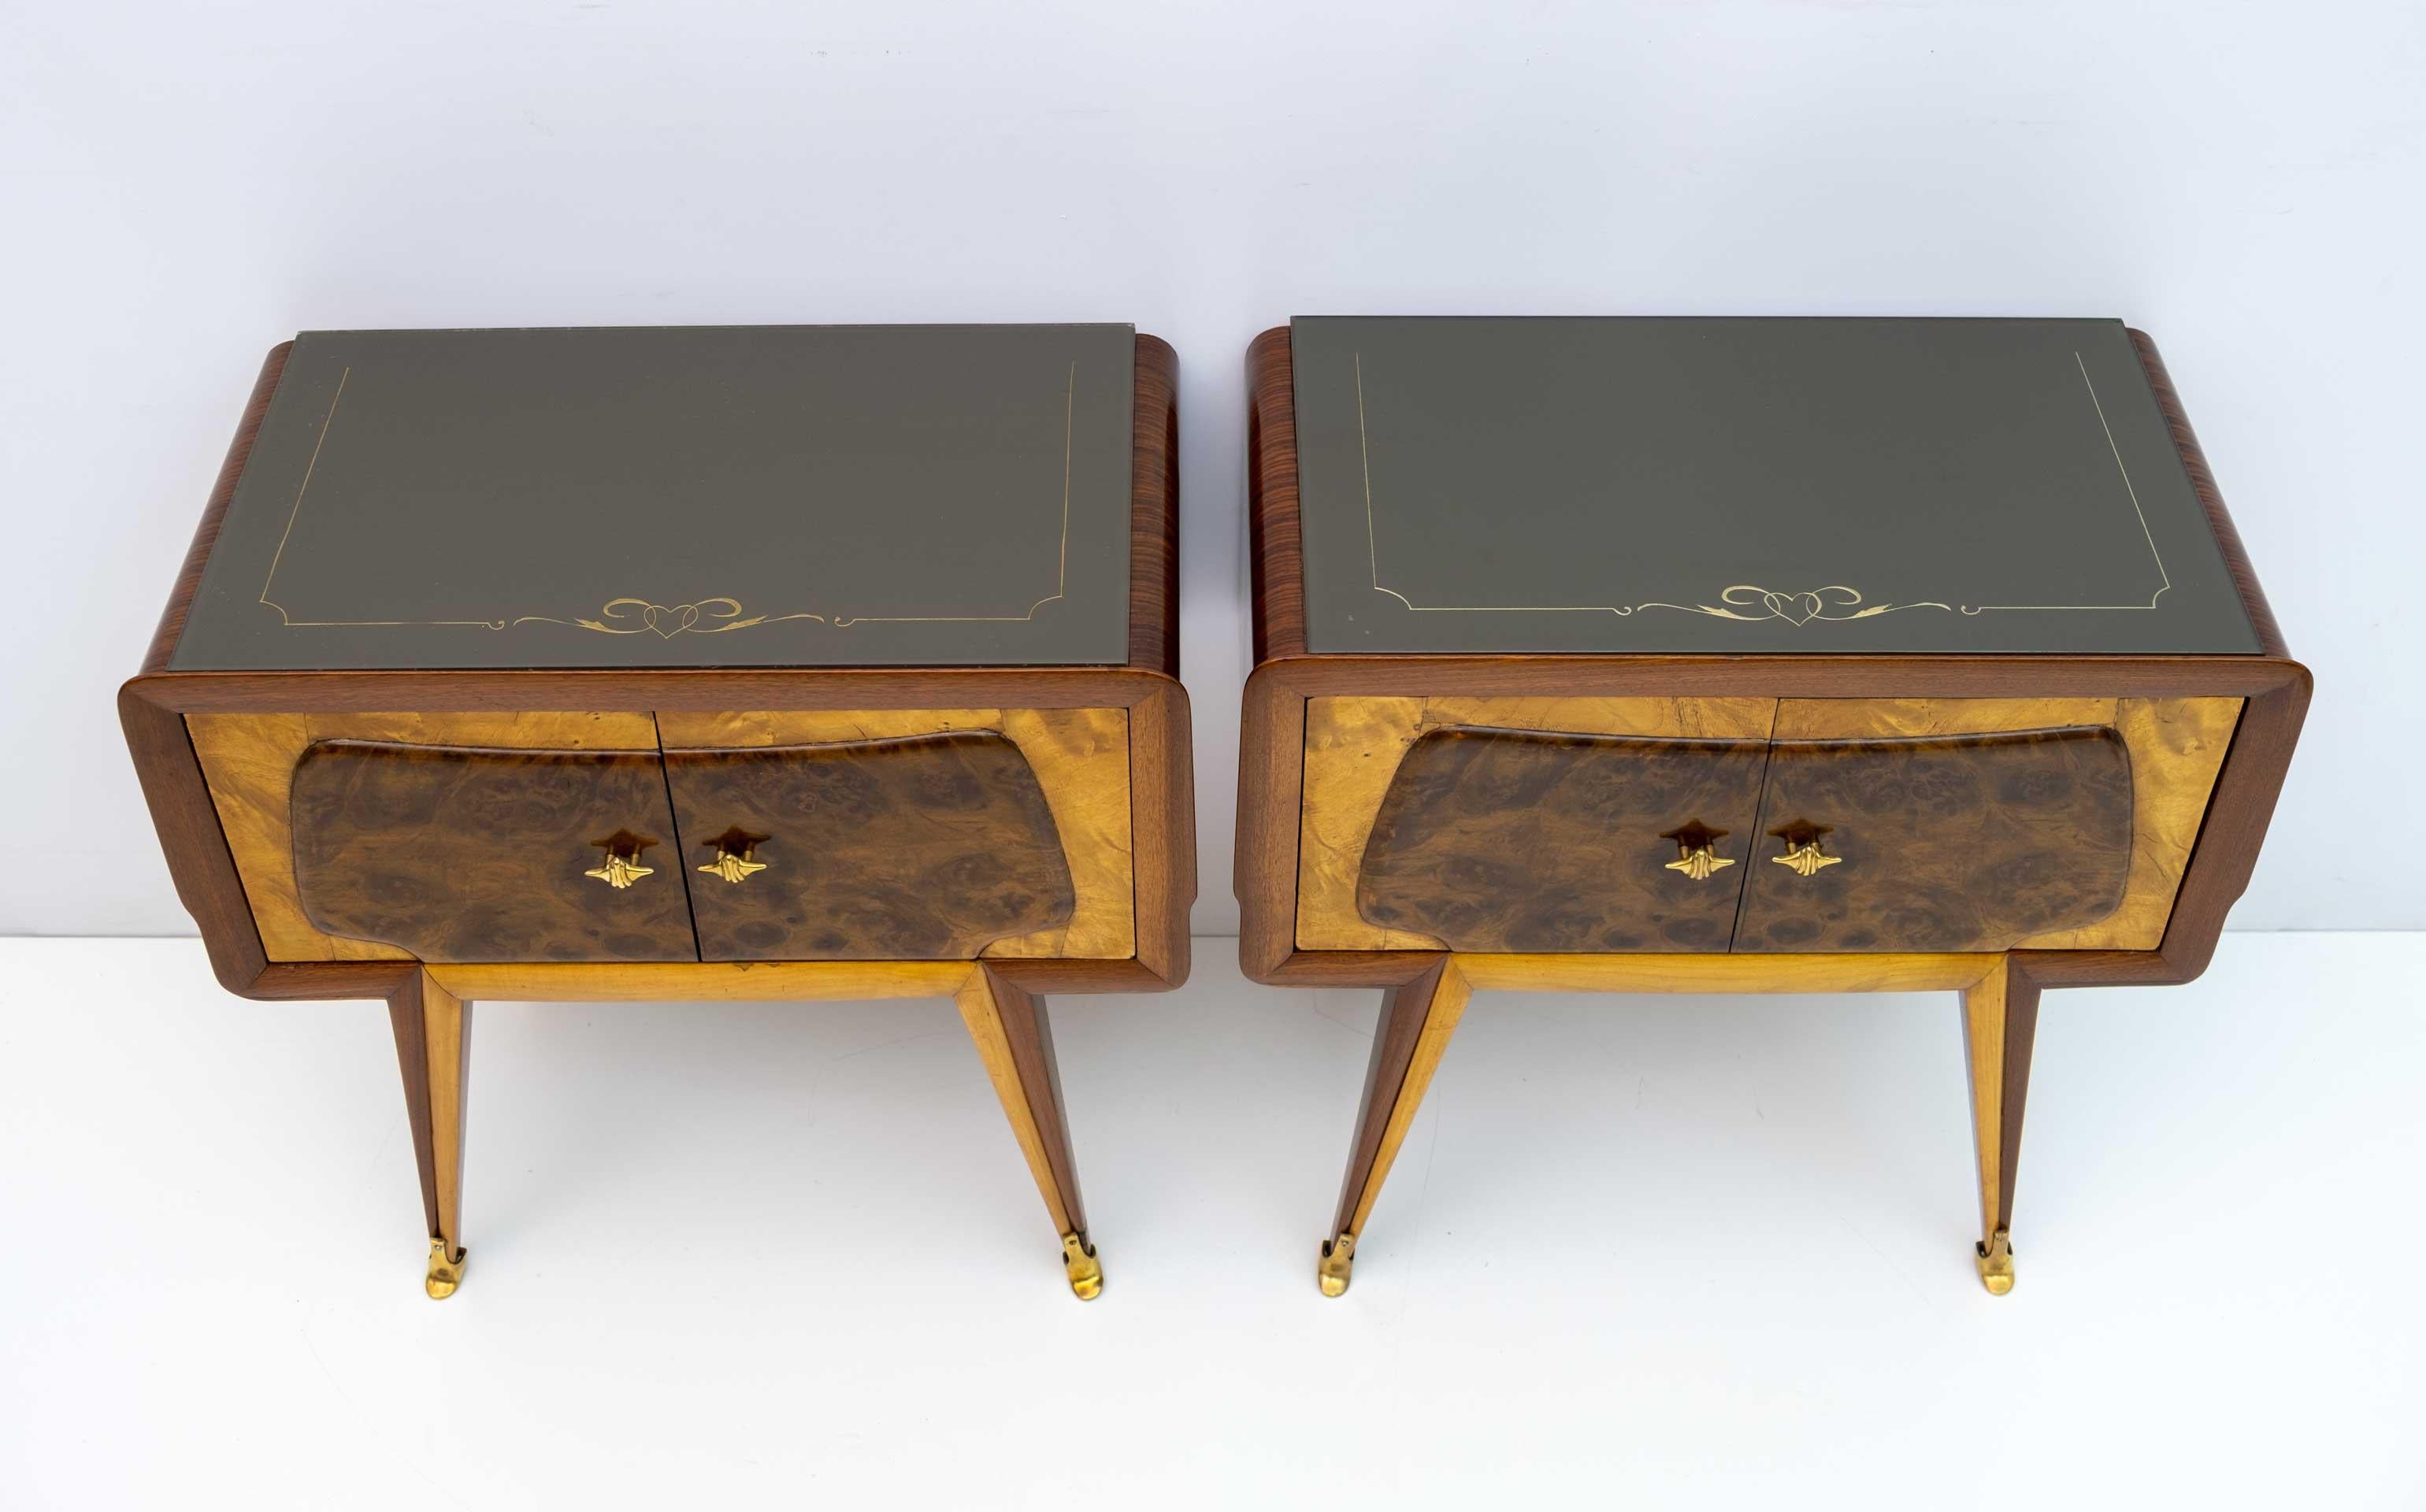 Pair of Mid-Century Modern Italian Maple and Walnut Nightstands, 1950s For Sale 1